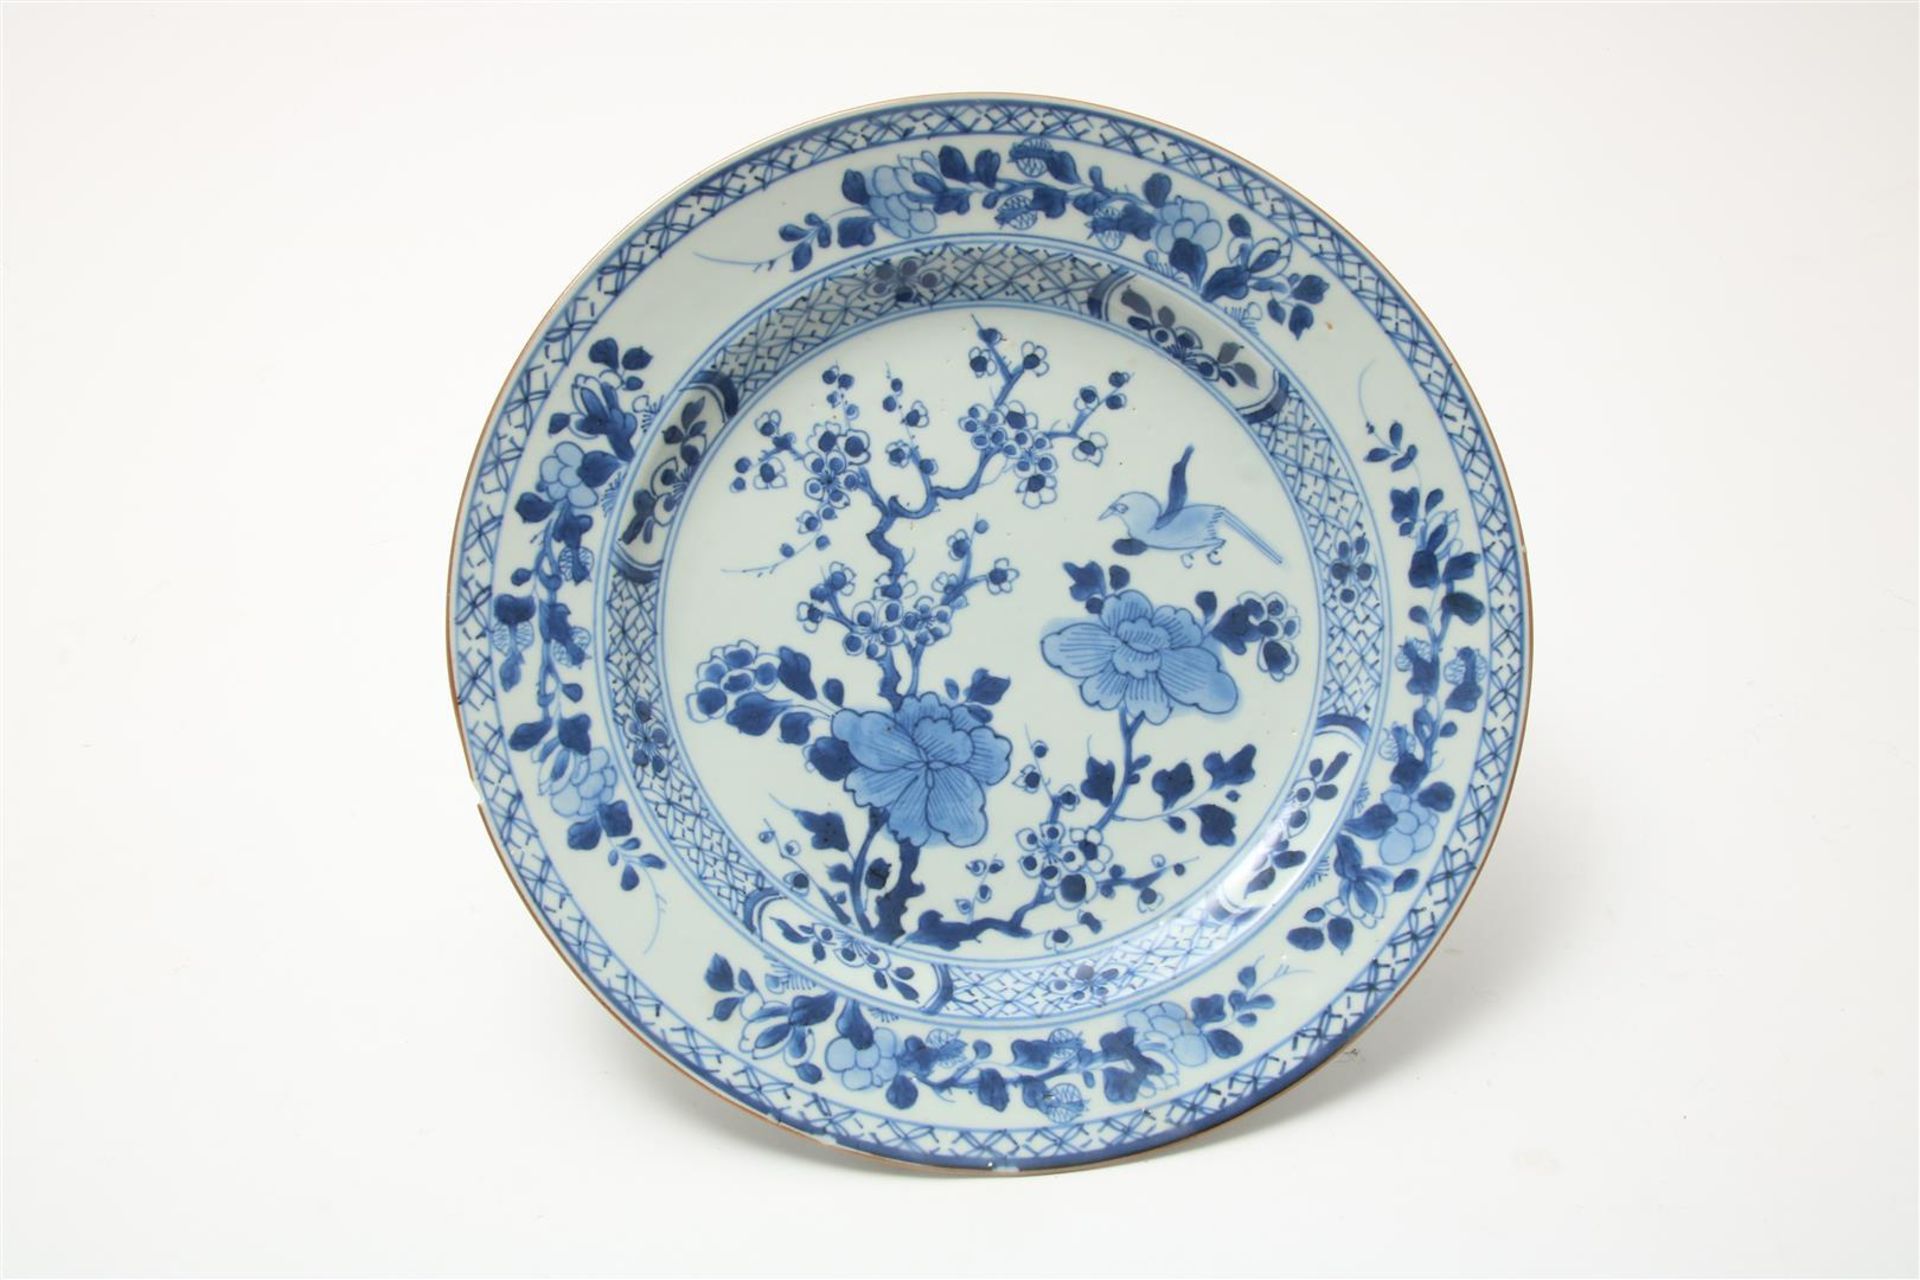 Set of porcelain Qianlong plates with a bird near flowering shrubs and a blossom branch, - Image 7 of 12